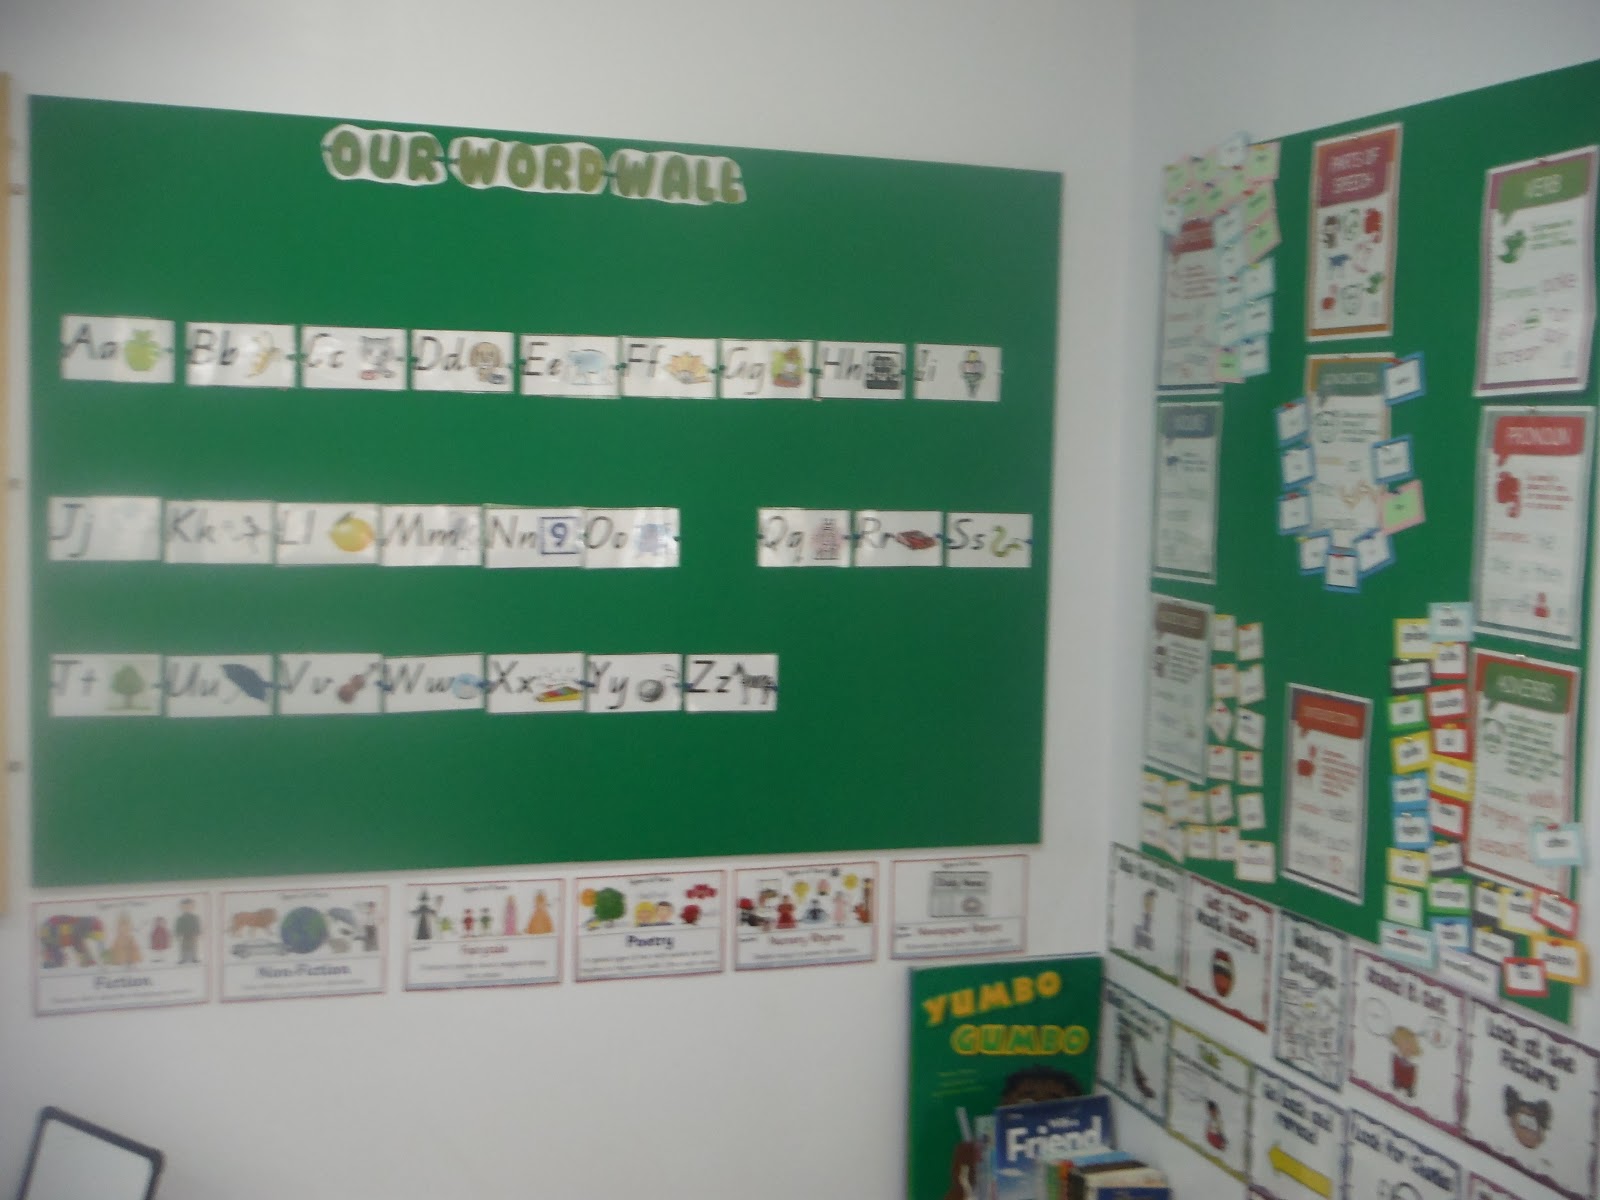 Make your working boards interactive to engage students all year!